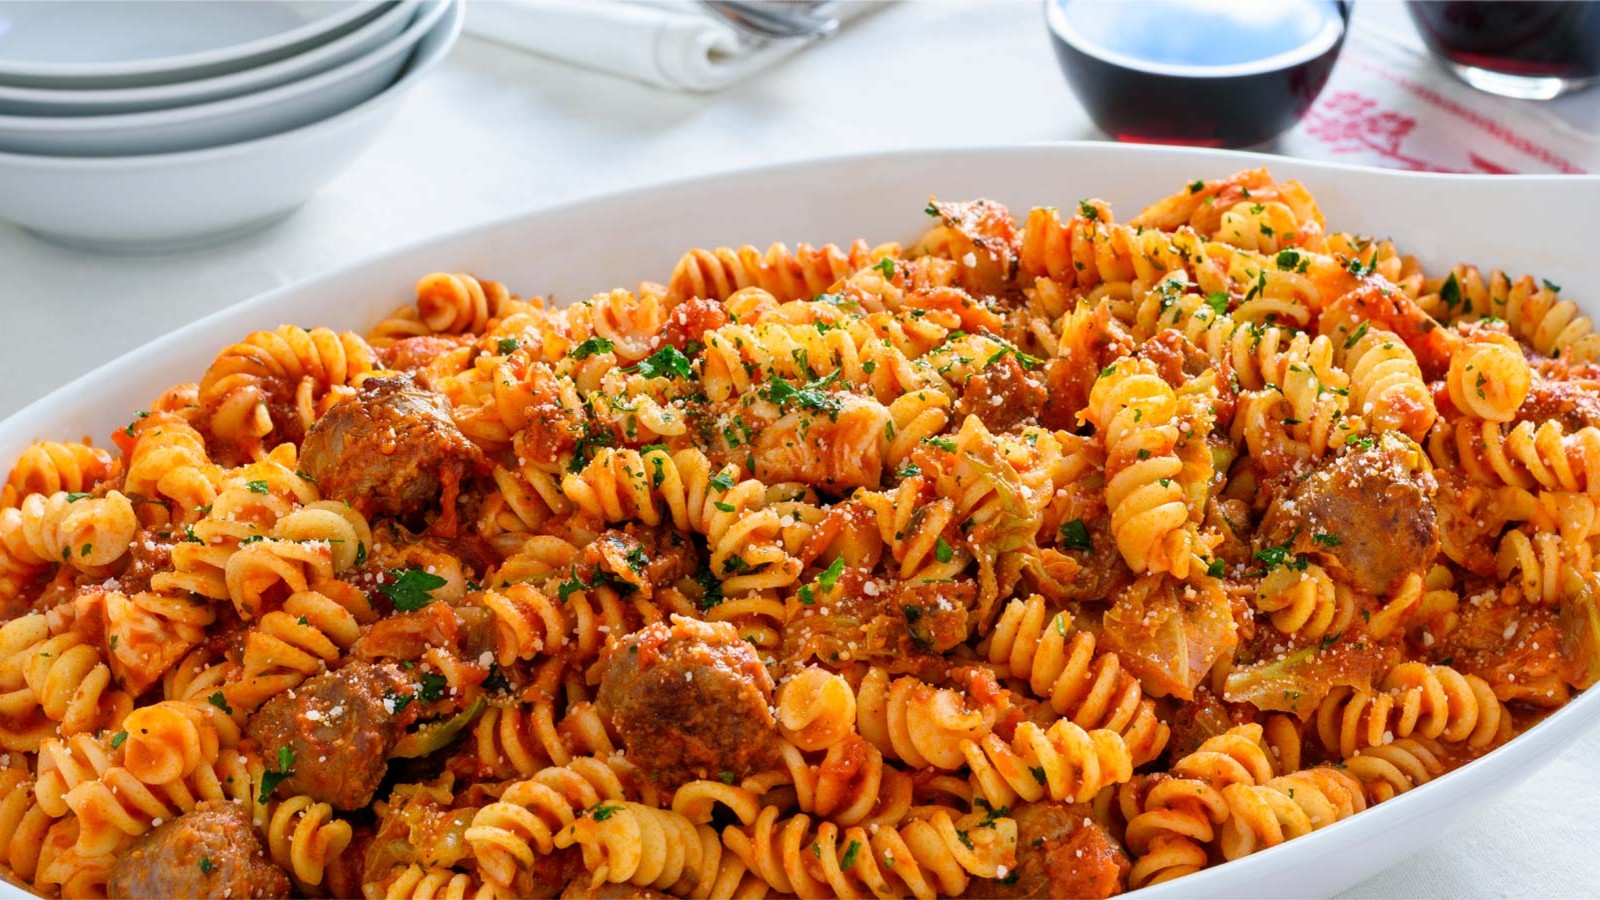 Image of Fusilli with Sausage and Cabbage